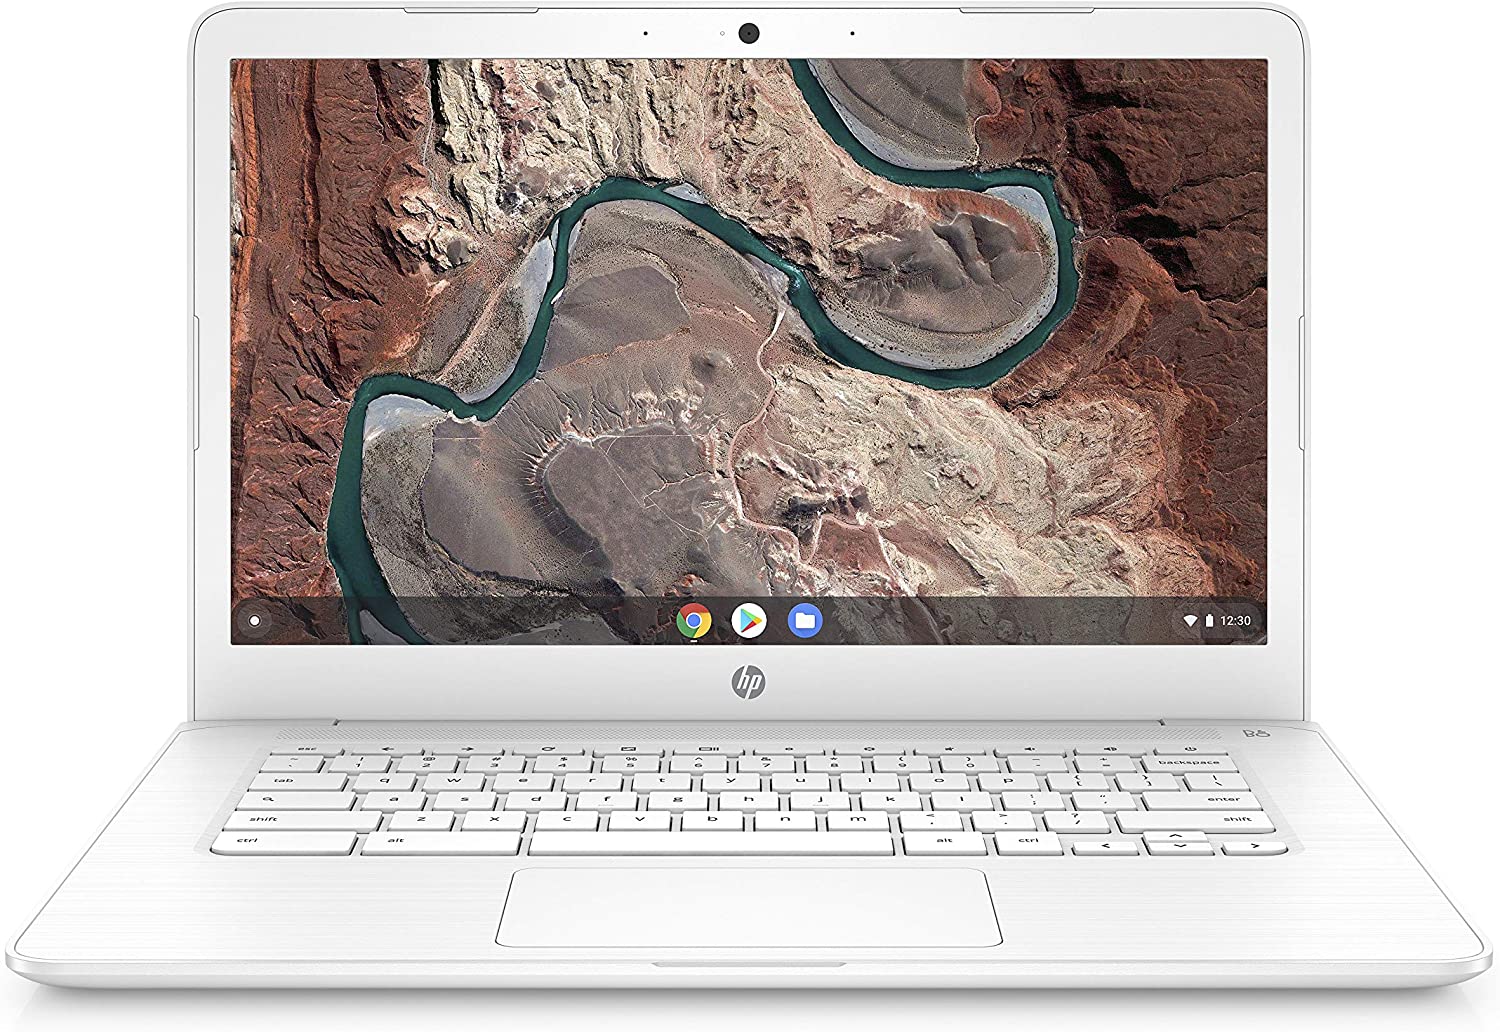 HP Chromebook 14-inch Laptop with 180-Degree Hinge - $160